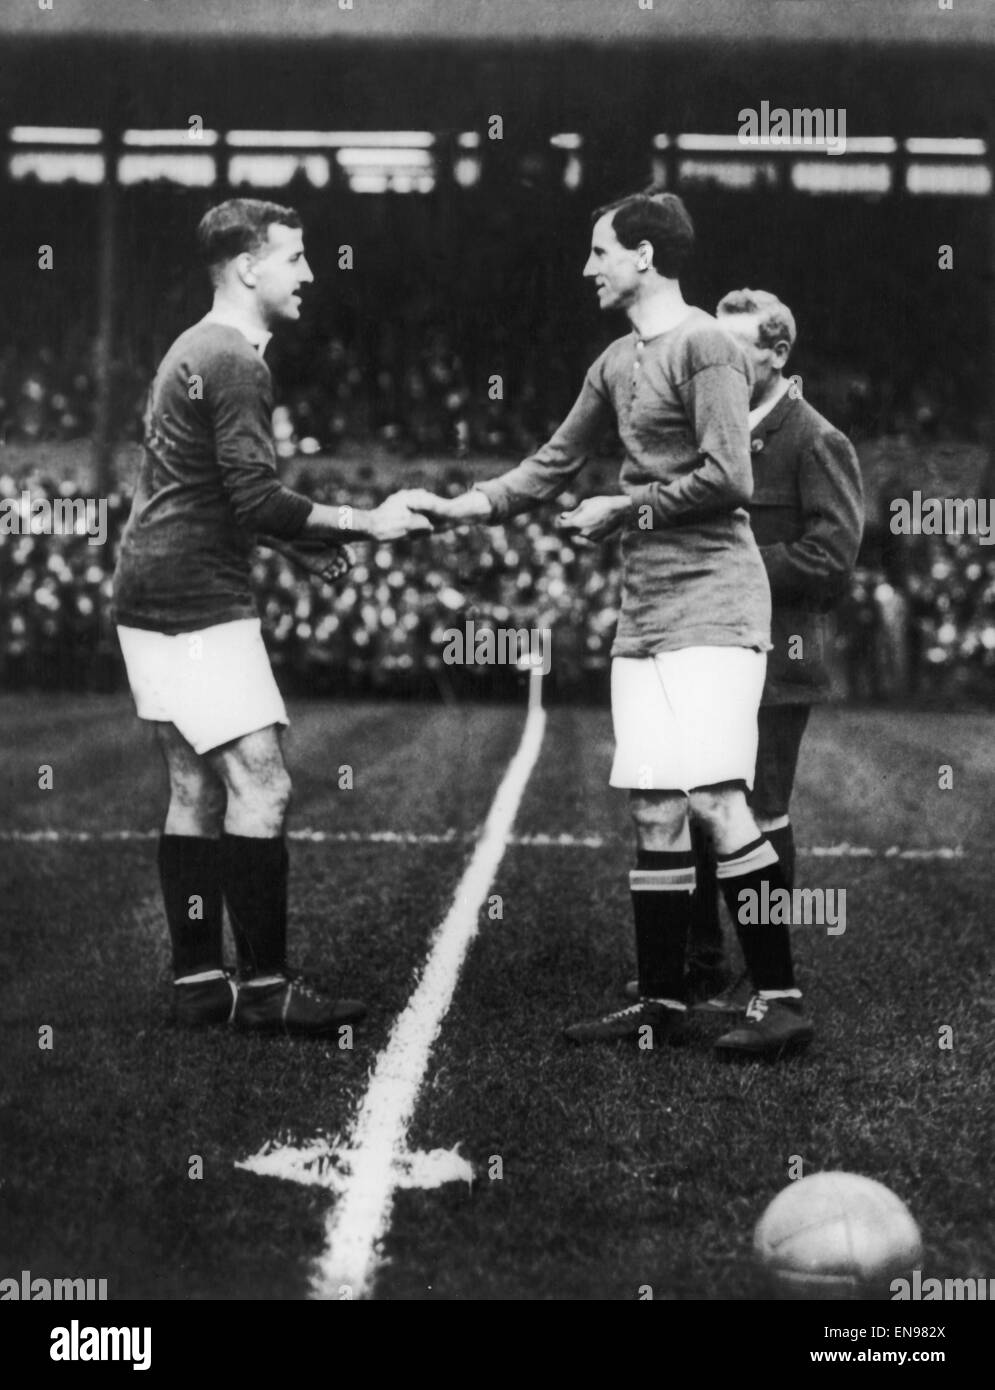 English League Division One match at Stamford Bridge. Chelsea 0 v Manchester United 2. Vivian Woodward of Chelsea (right) shakes hands with United captain George Stacy before kick off. 20th September 1913. Stock Photo